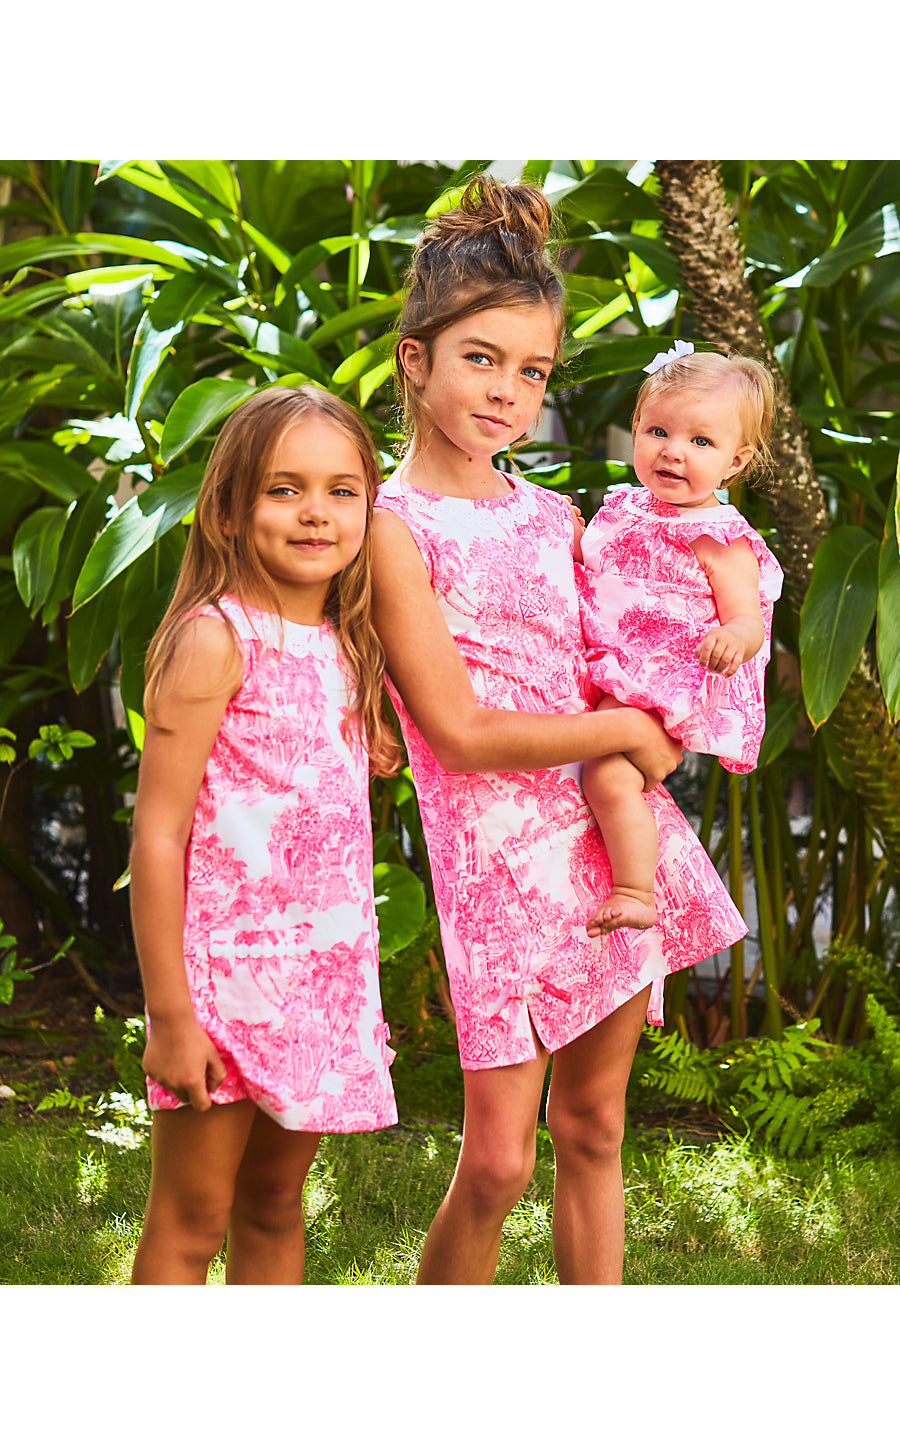 Explore Pink Leopard: vibrant Lilly Pulitzer fashion & styles